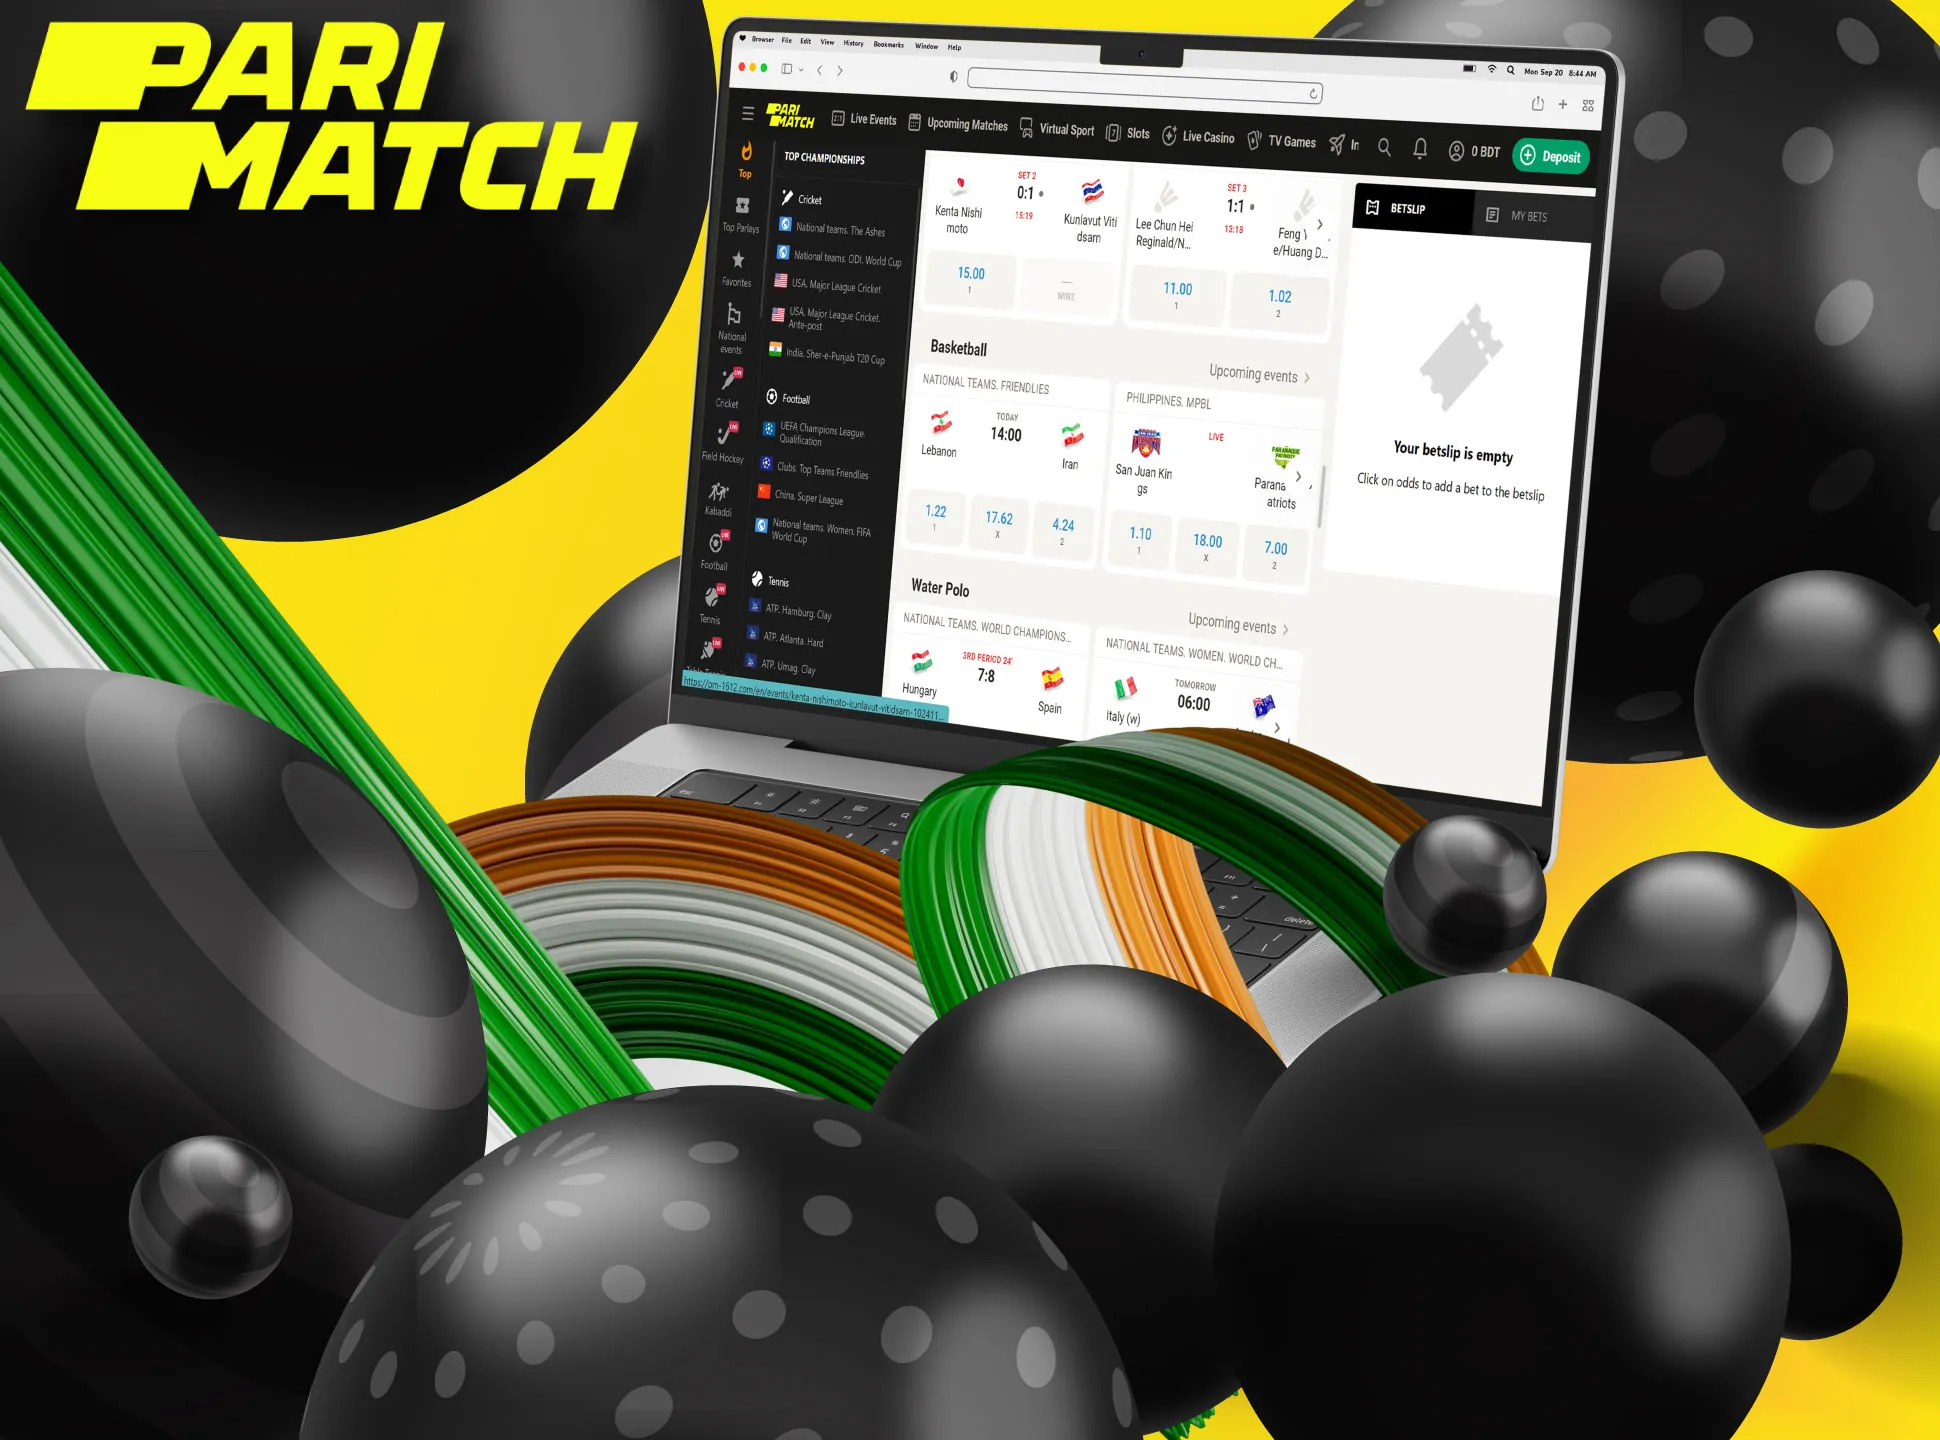 On Parimatch you can choose on of the various sports and casino entertainments.